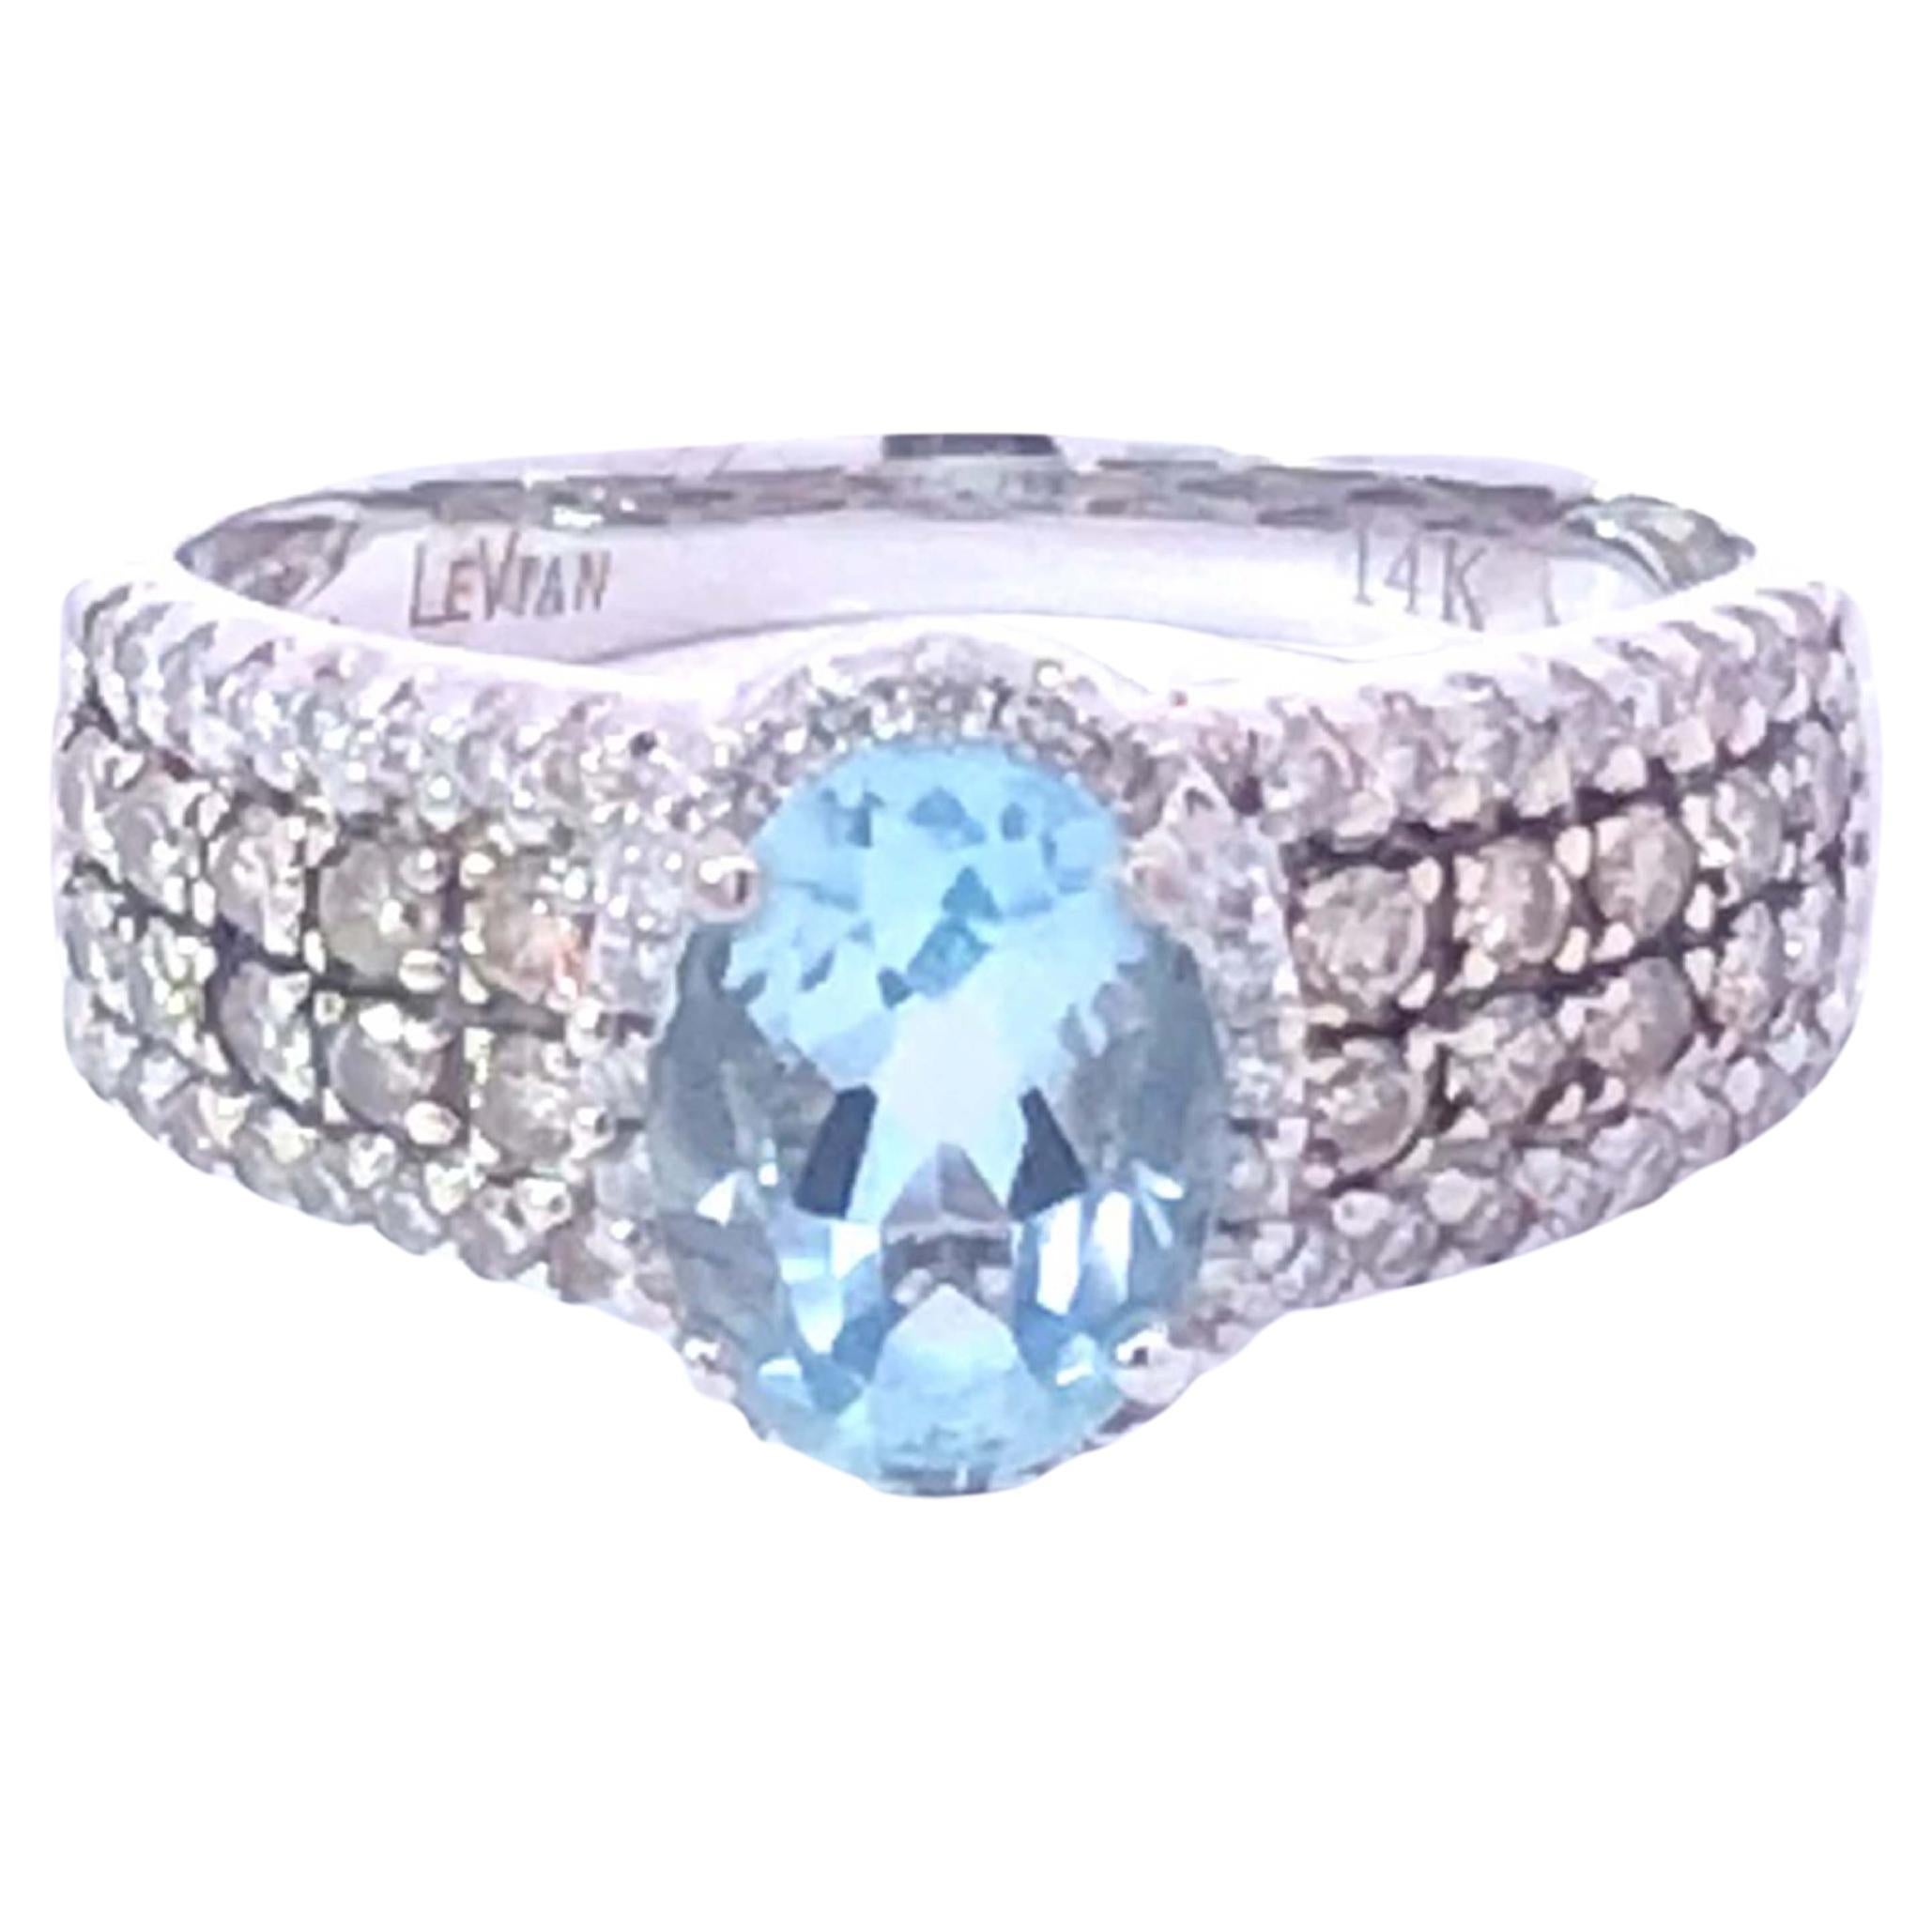 Le Vian Aquamarine and Diamond Statement Ring in 14k White Gold